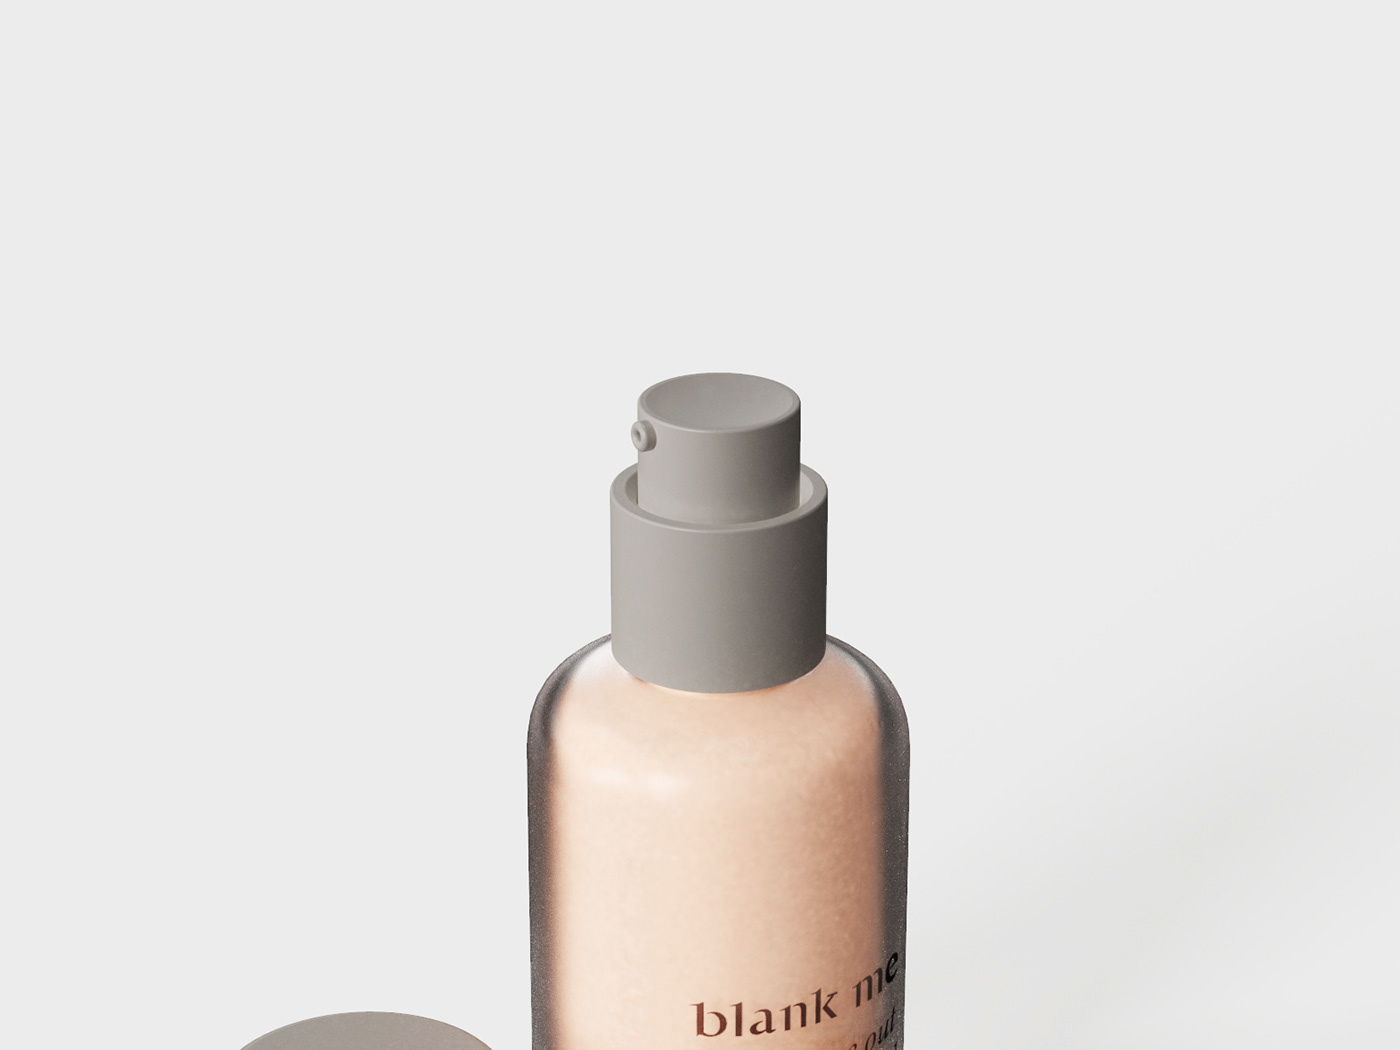 beauty foundation make-up skin care products くノ一 땅콩주소 Packaging Brand Design product design 